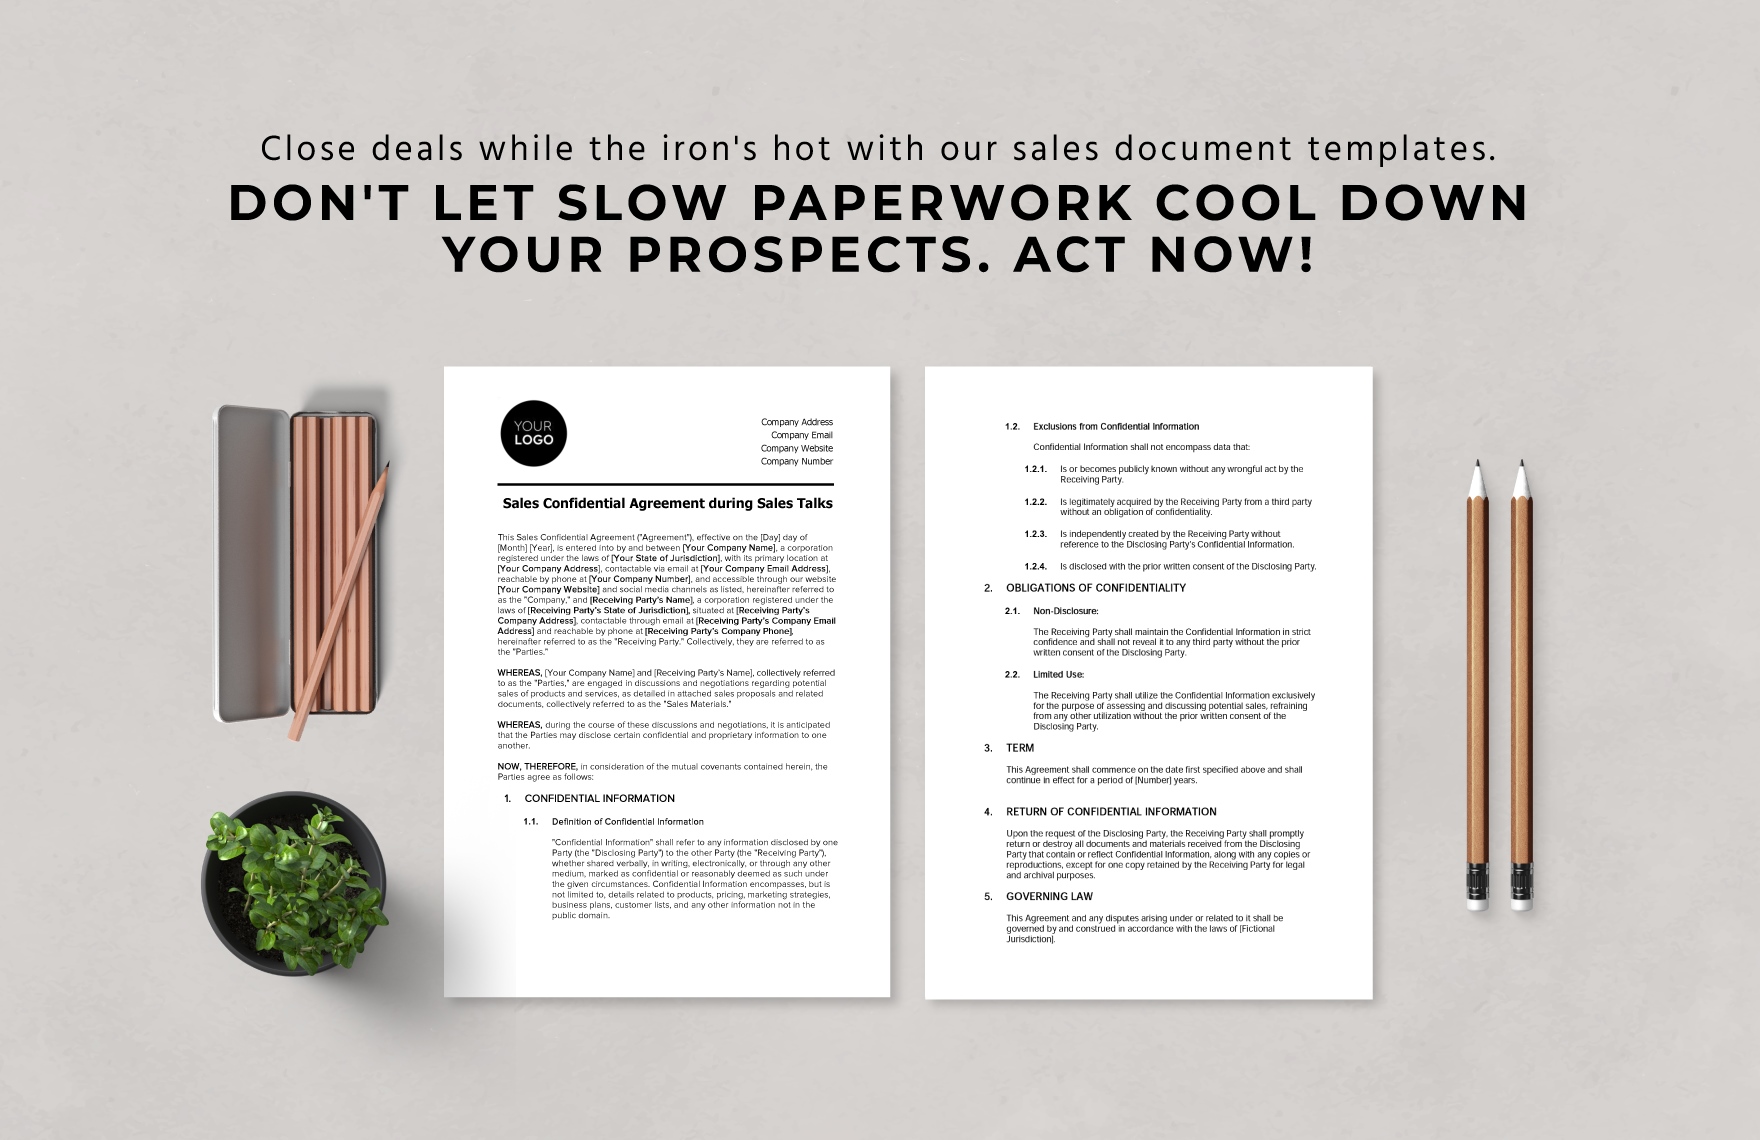 Sales Confidential Agreement during Sales Talks Template